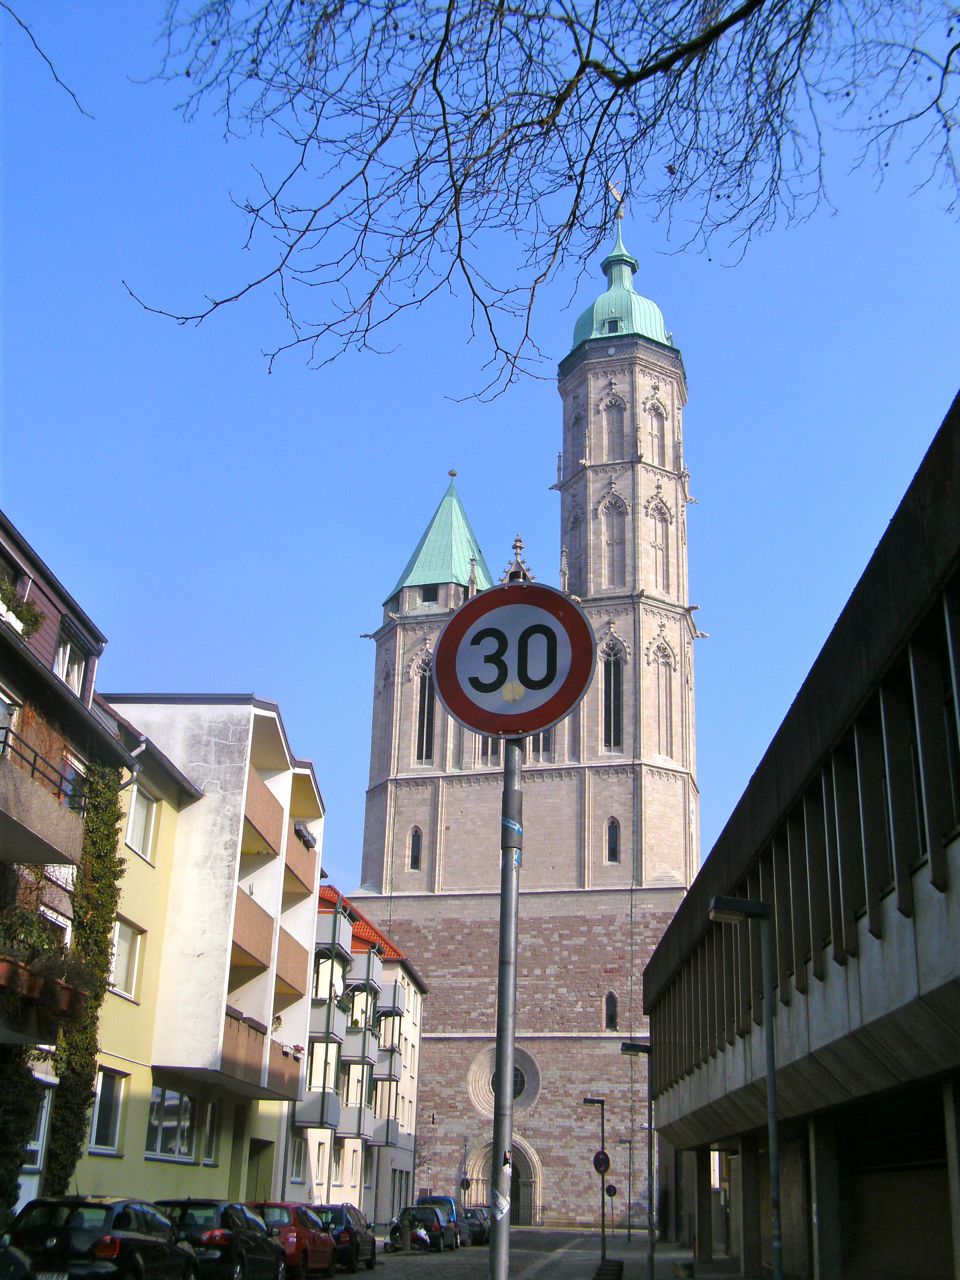 a street sign near the side of the road with a church in the background